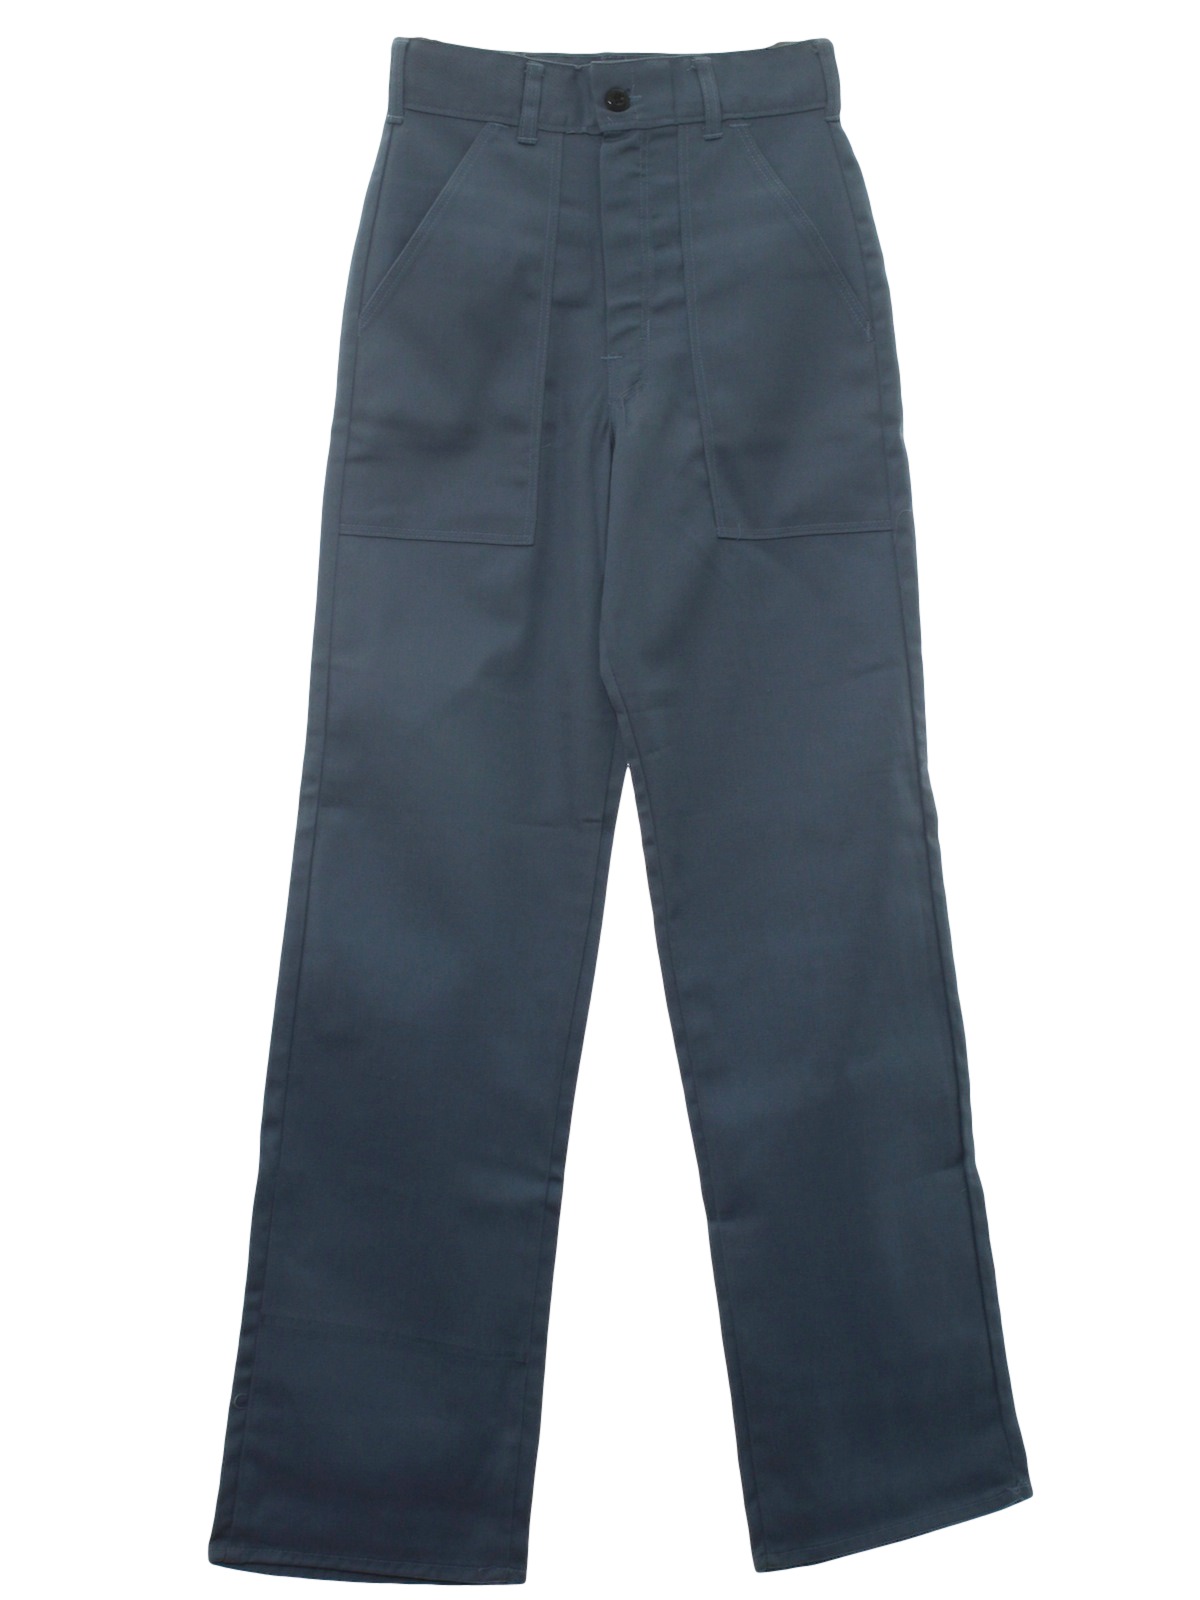 Retro 70's Pants: Late 70s/Early 80s -Shed House- poly/cotton twill sky ...